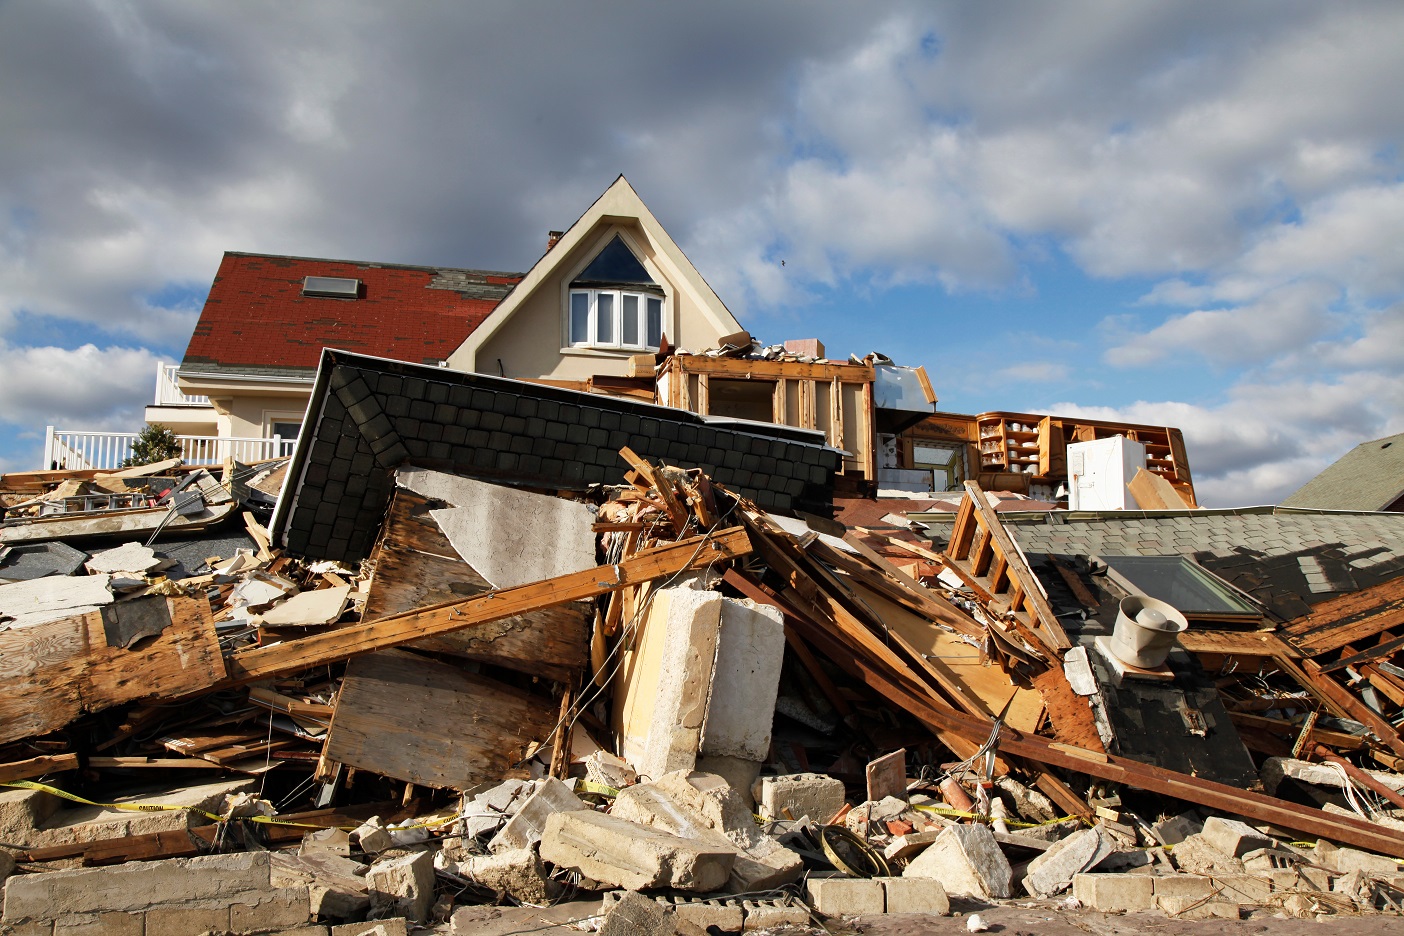 What to Do if You Experience Property Damage and Need to File a Claim